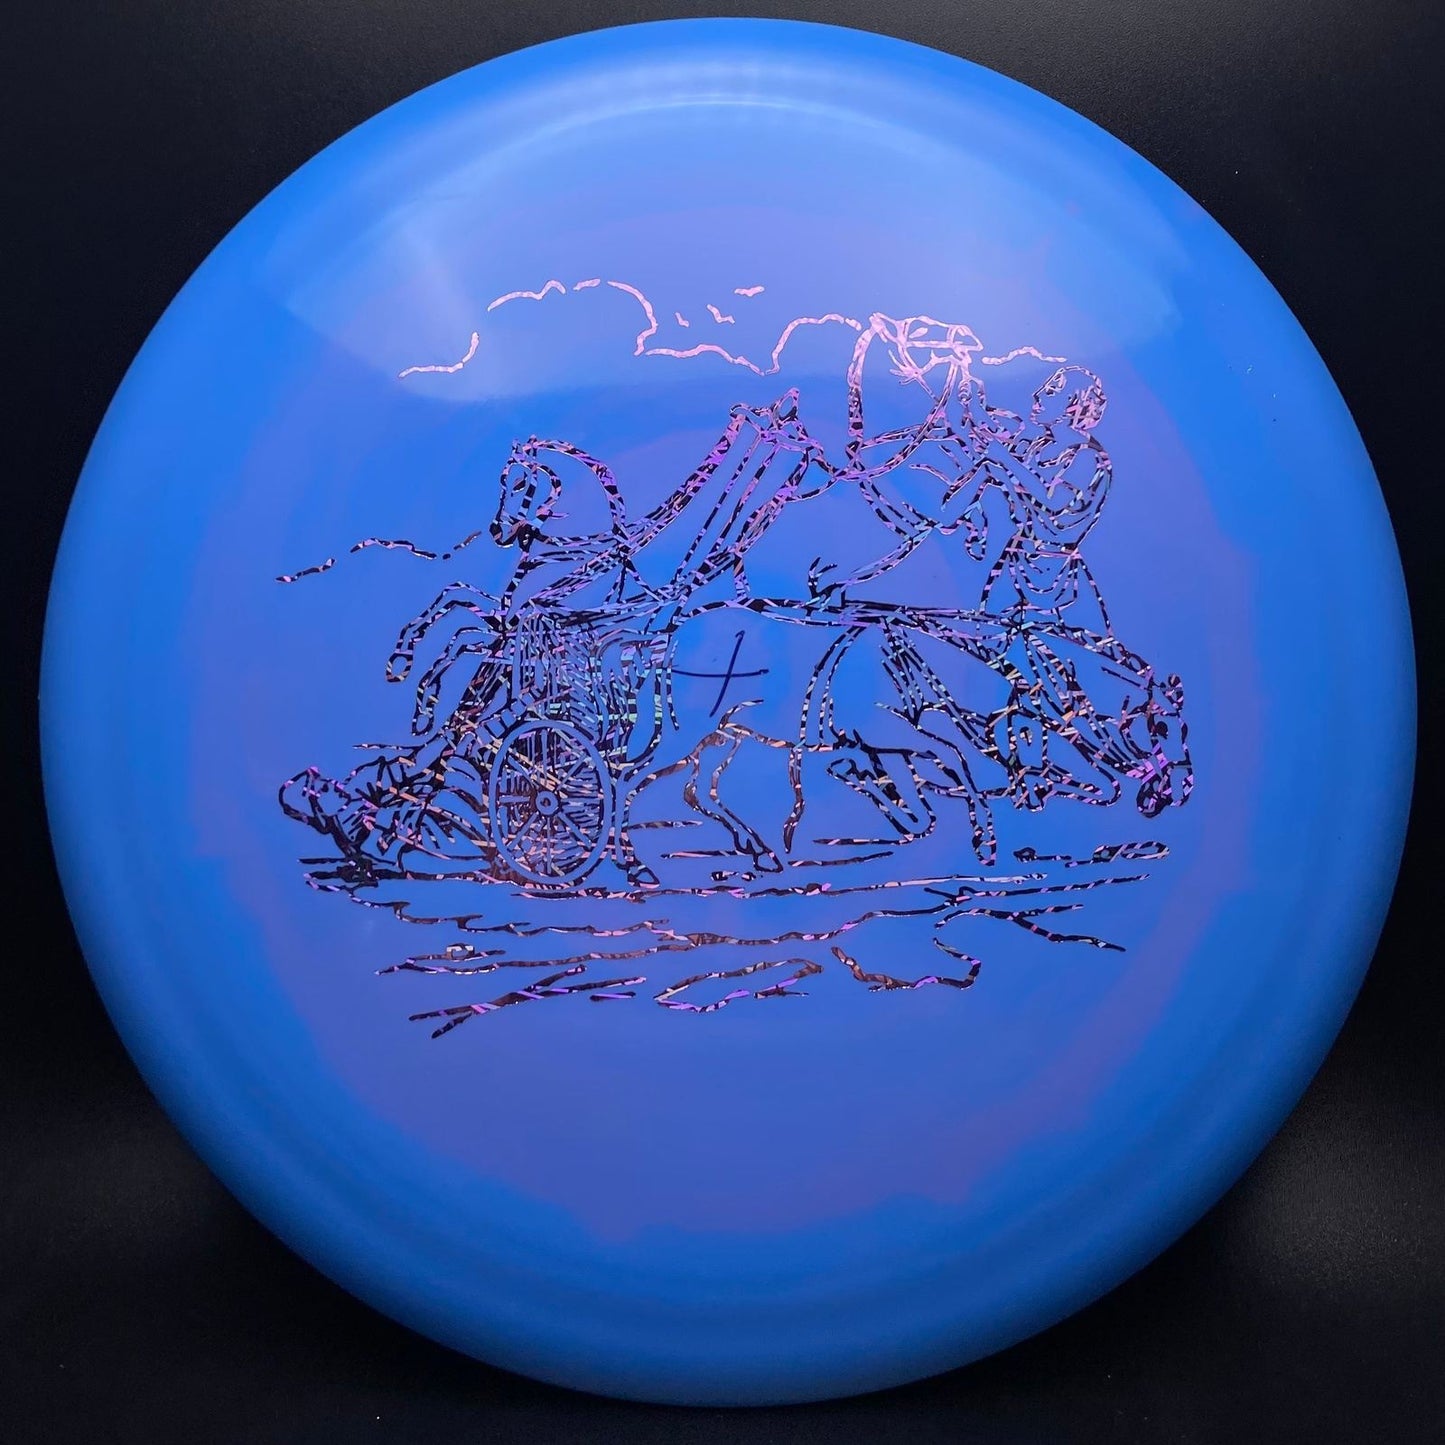 Swirly S-Blend Dynasty - X-Out Infinite Discs